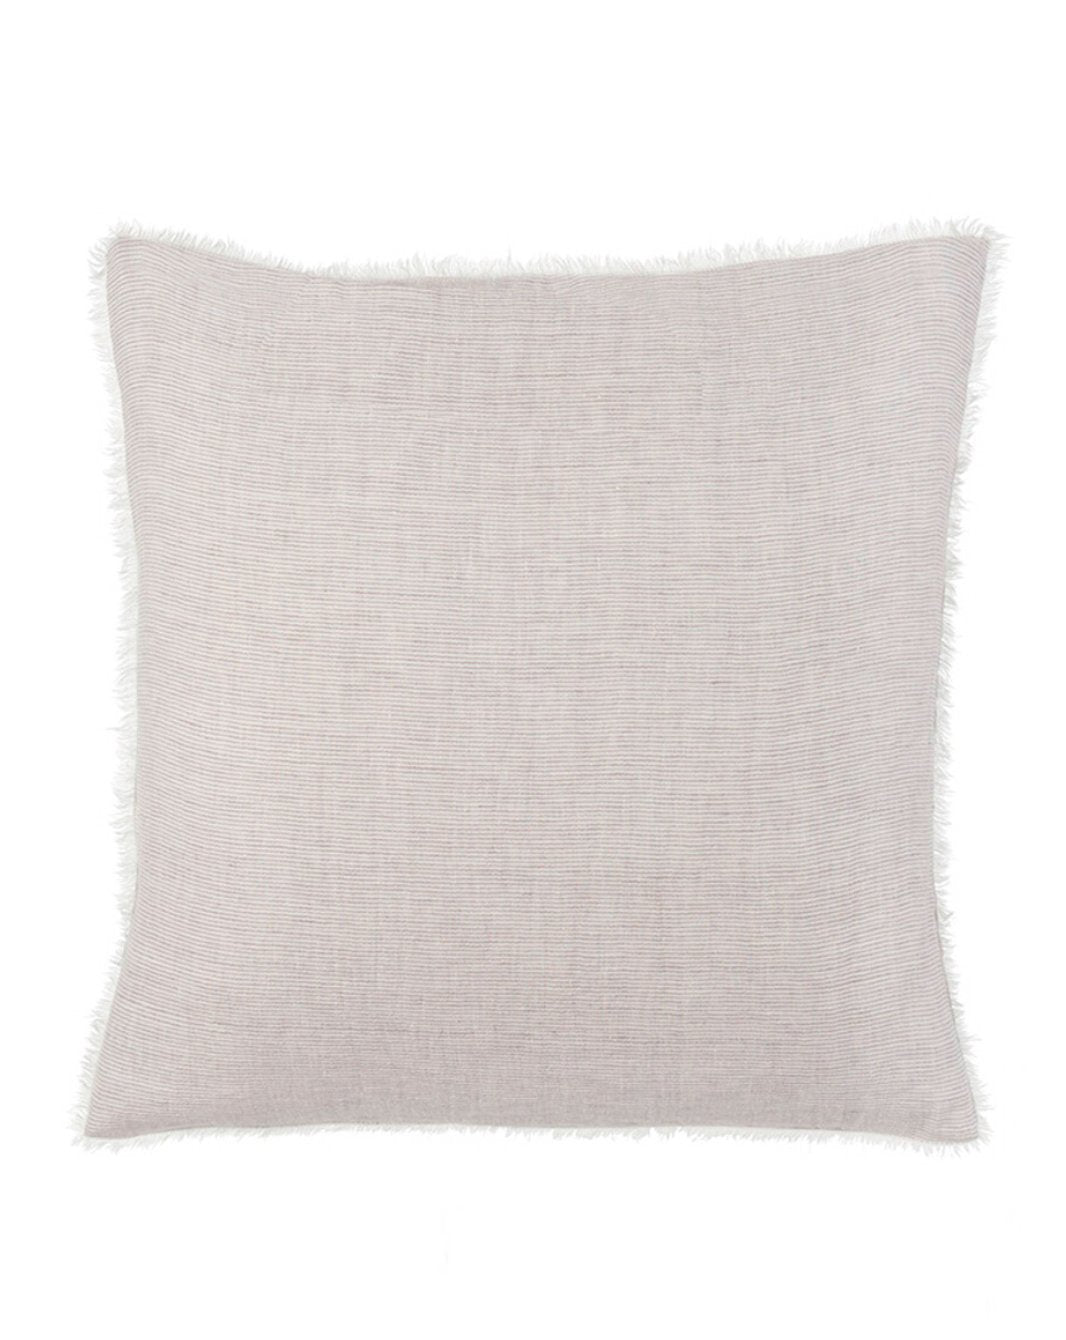 LINA LINEN PILLOW  -  GREY STRIPE living-decorative-object Indaba trading co Default Title  